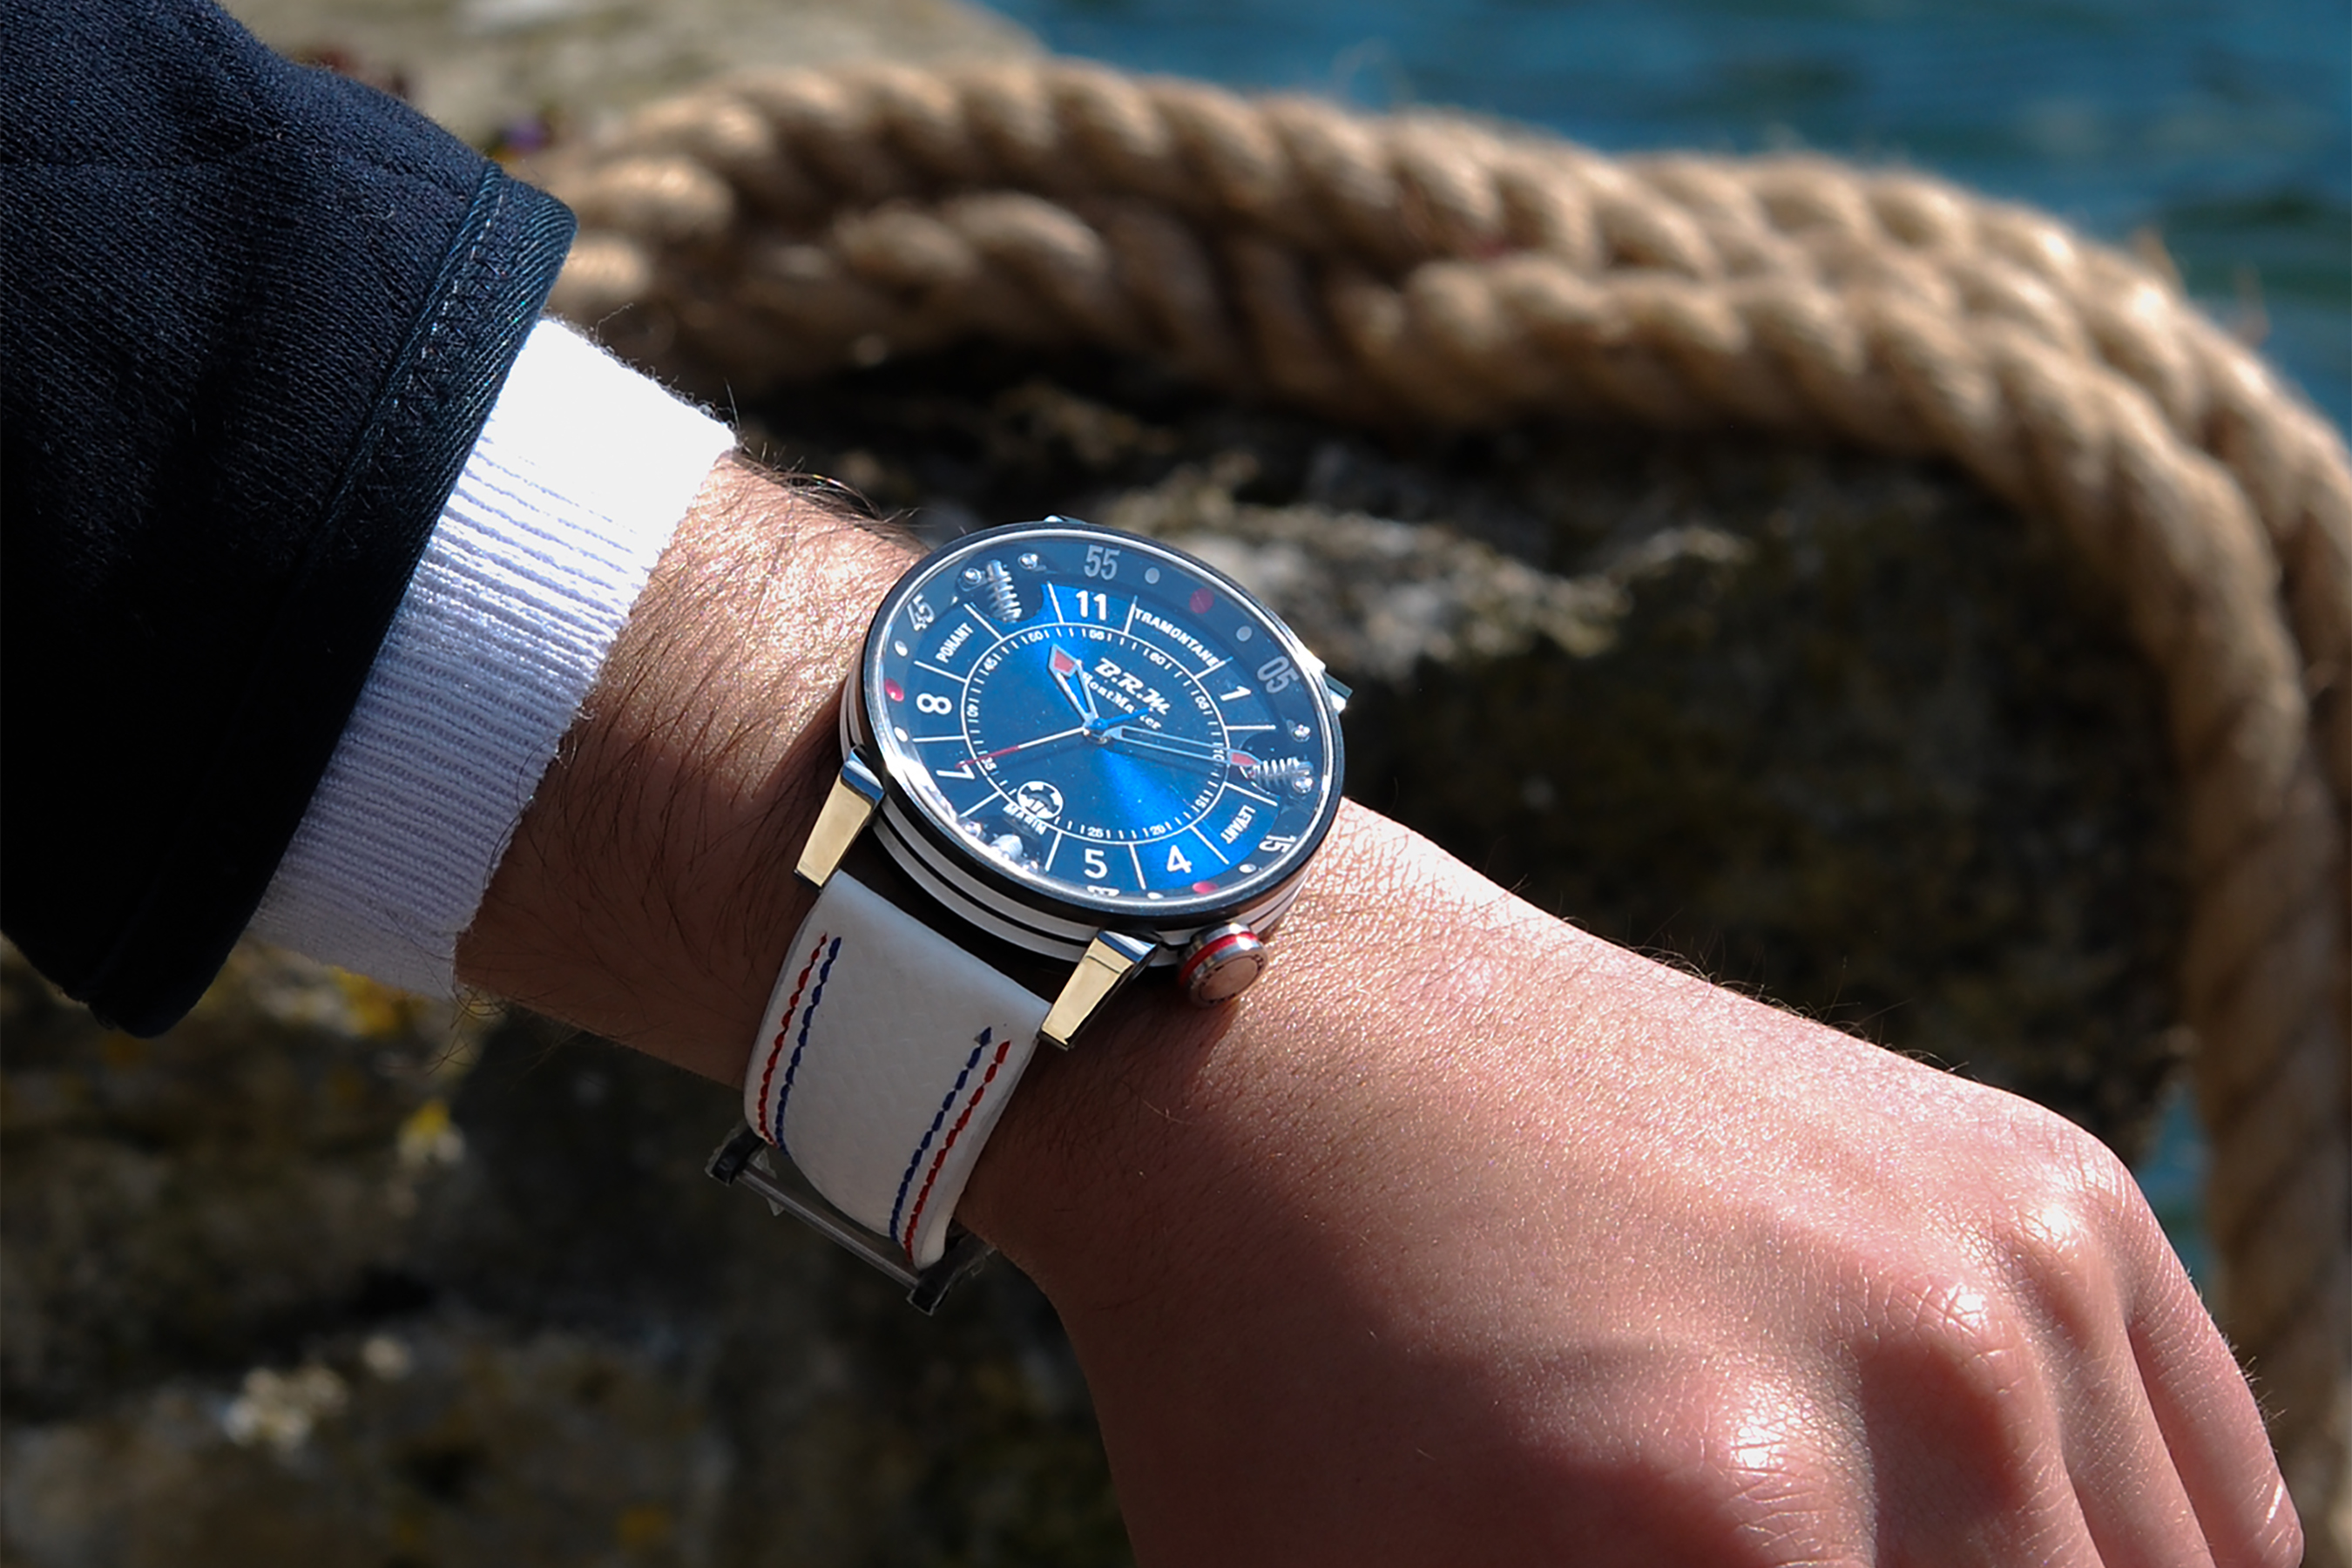 A new watch collection for water sport enthusiasts: Boat Master